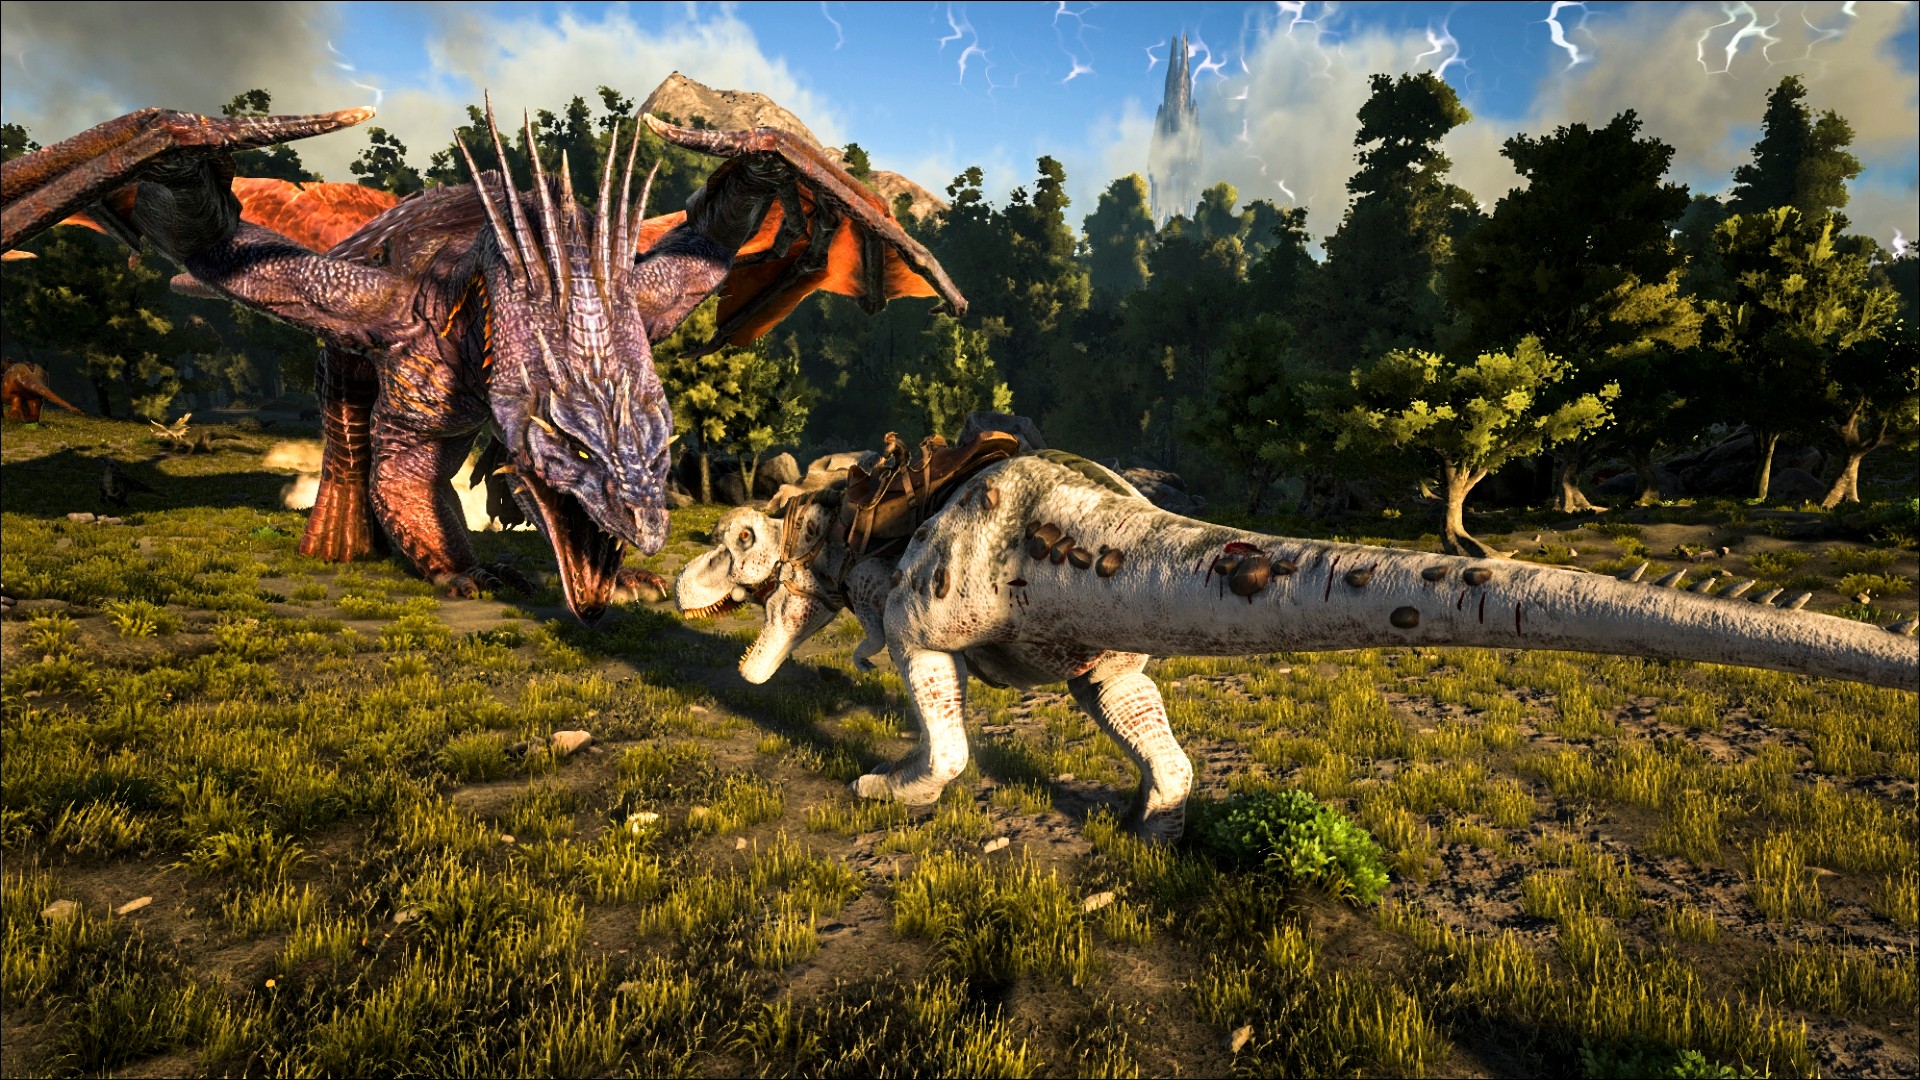 Best dragon games: Ark: Survival Evolved. Image shows a dragon and a T-rex near each other.